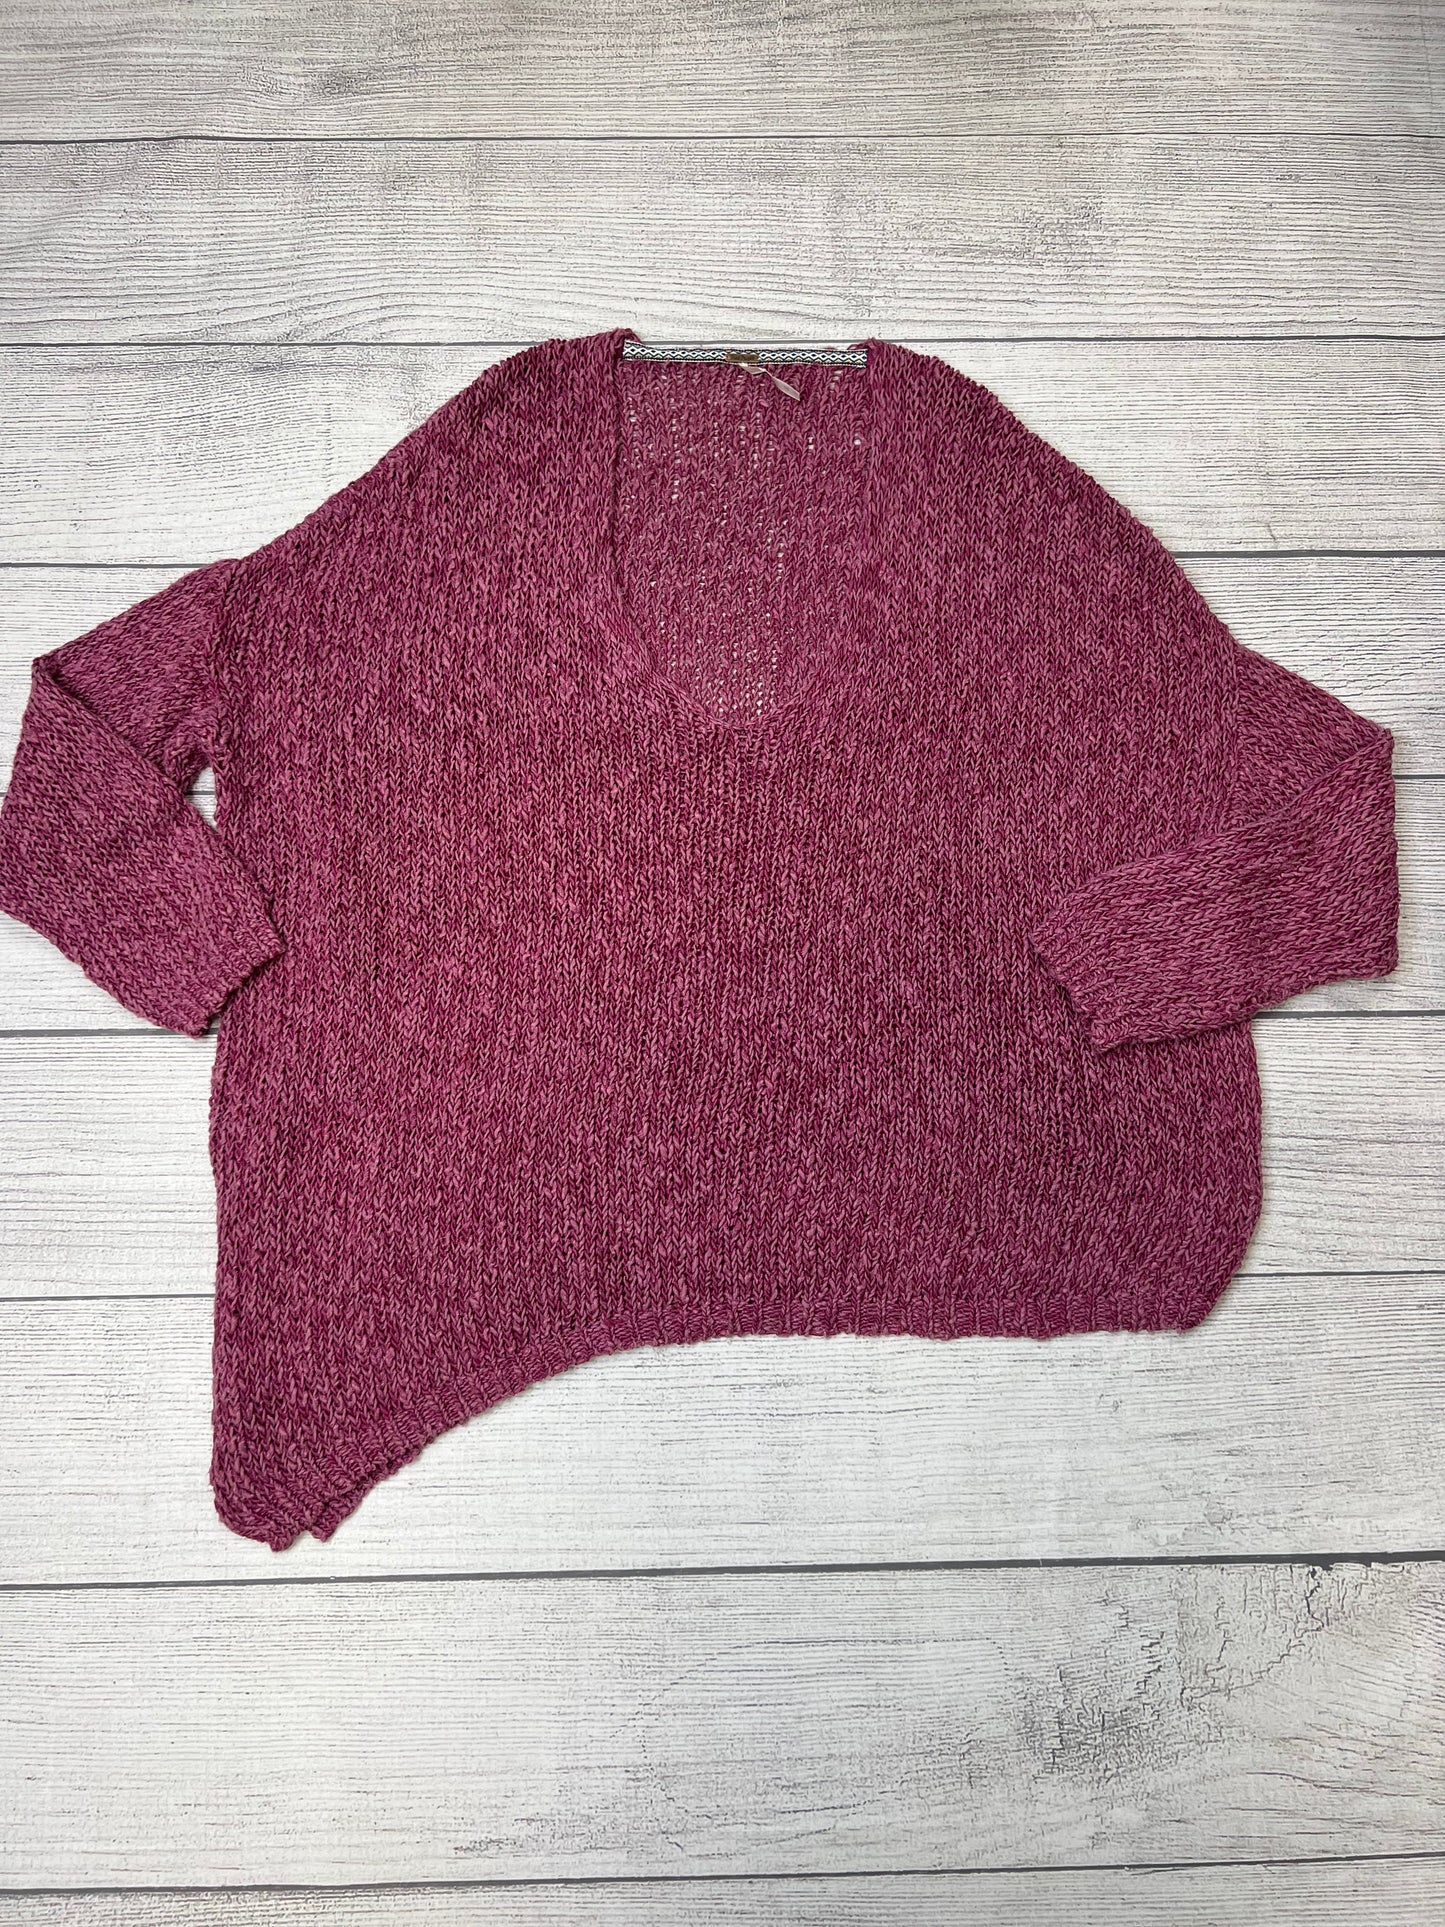 Sweater By Free People  Size: M